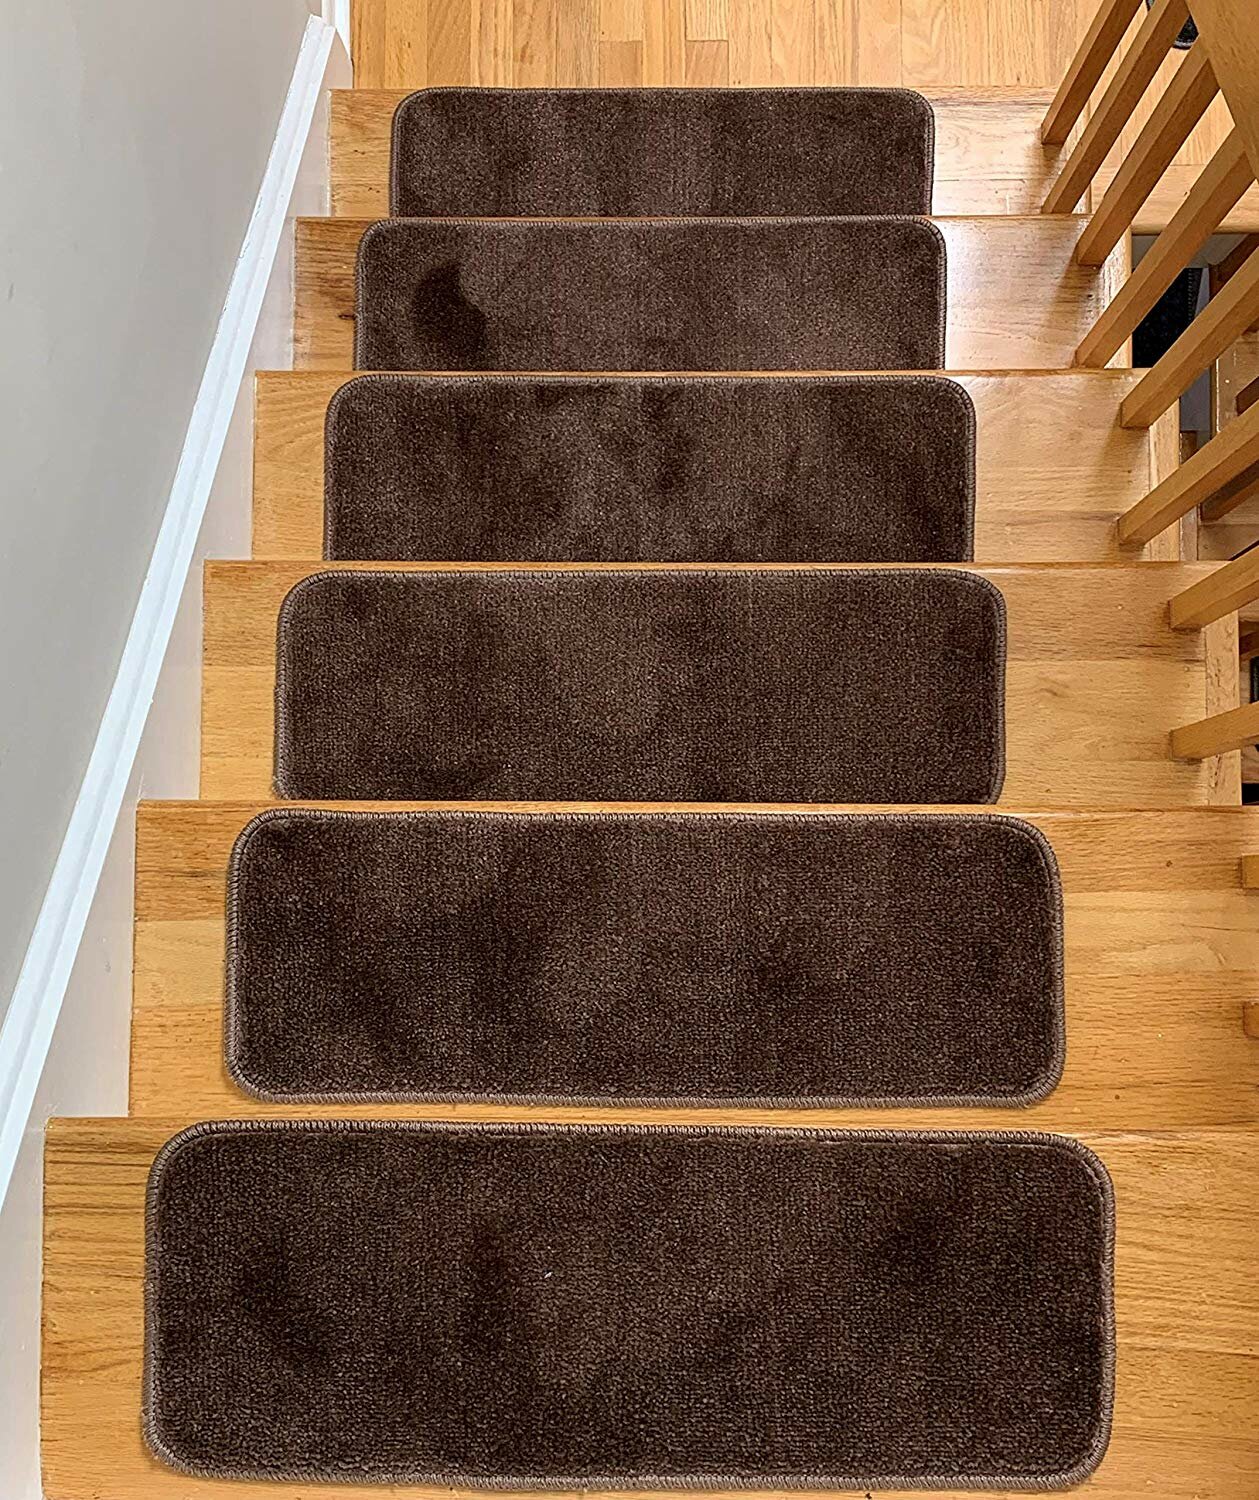 Orchard Mills AII DOG ASSIST Carpet Stair Treads